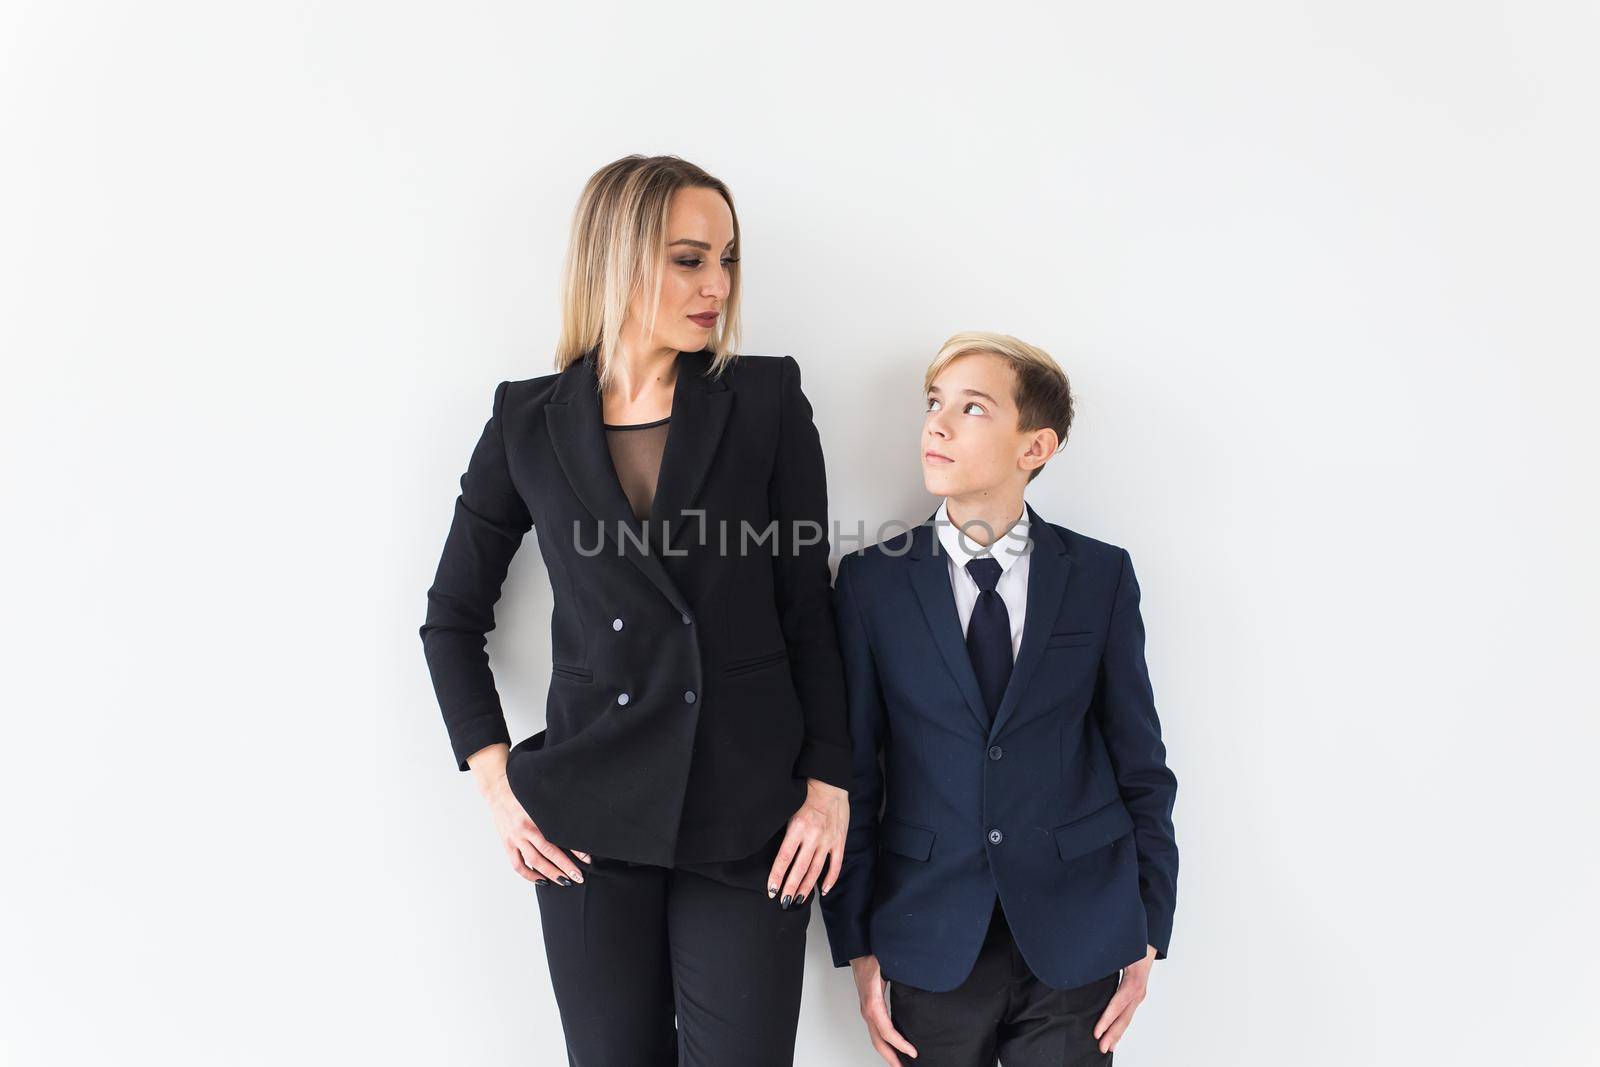 Teenager and single parent - Young mother and son standing together on white background. by Satura86